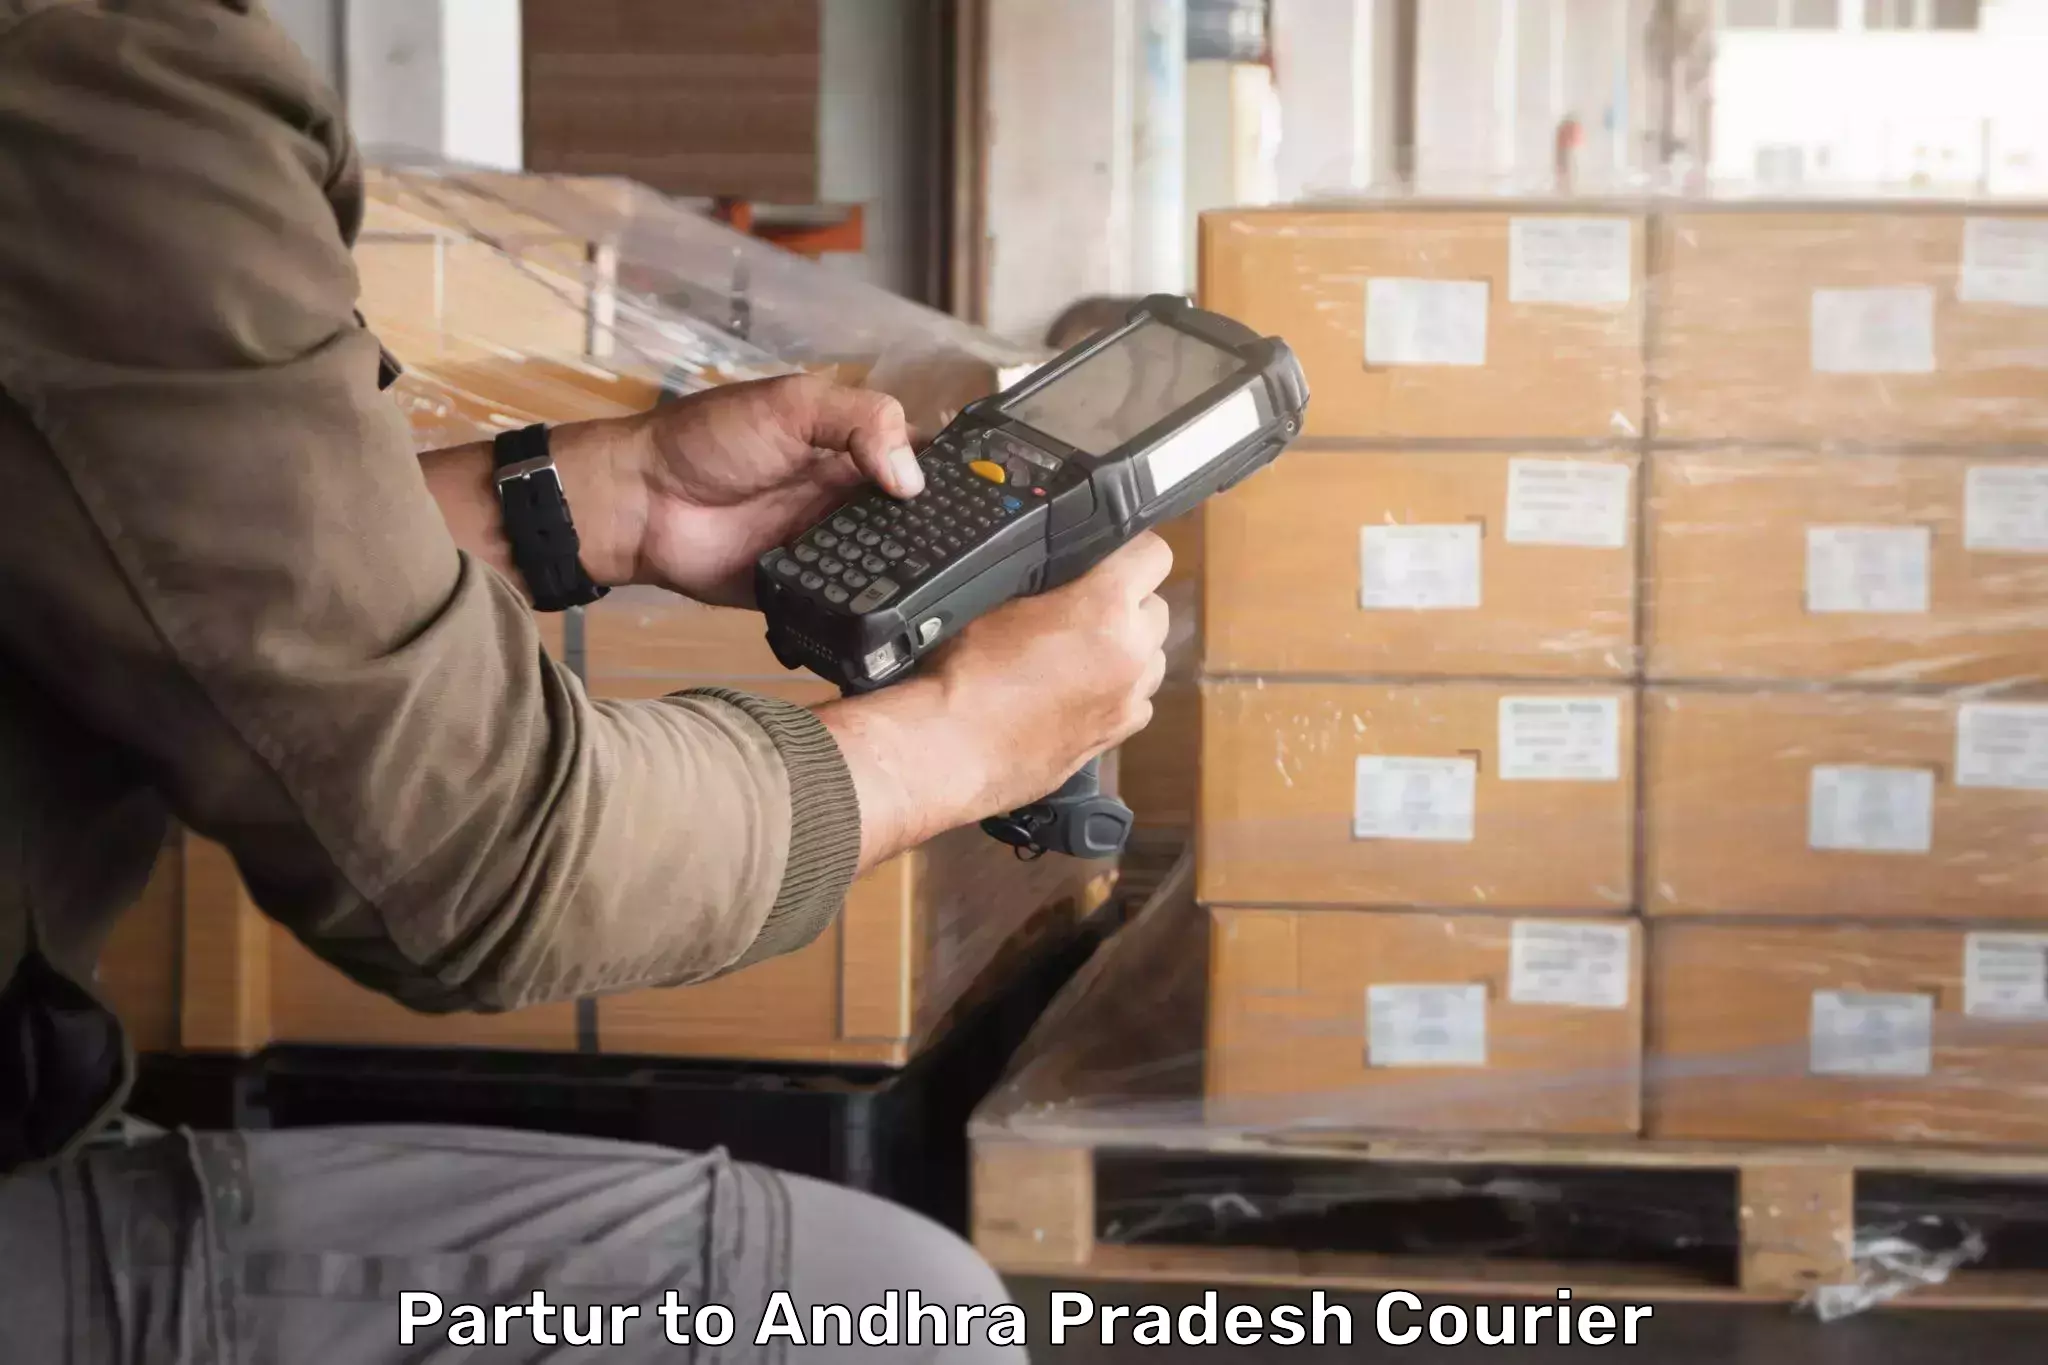 Modern courier technology in Partur to Visakhapatnam Port